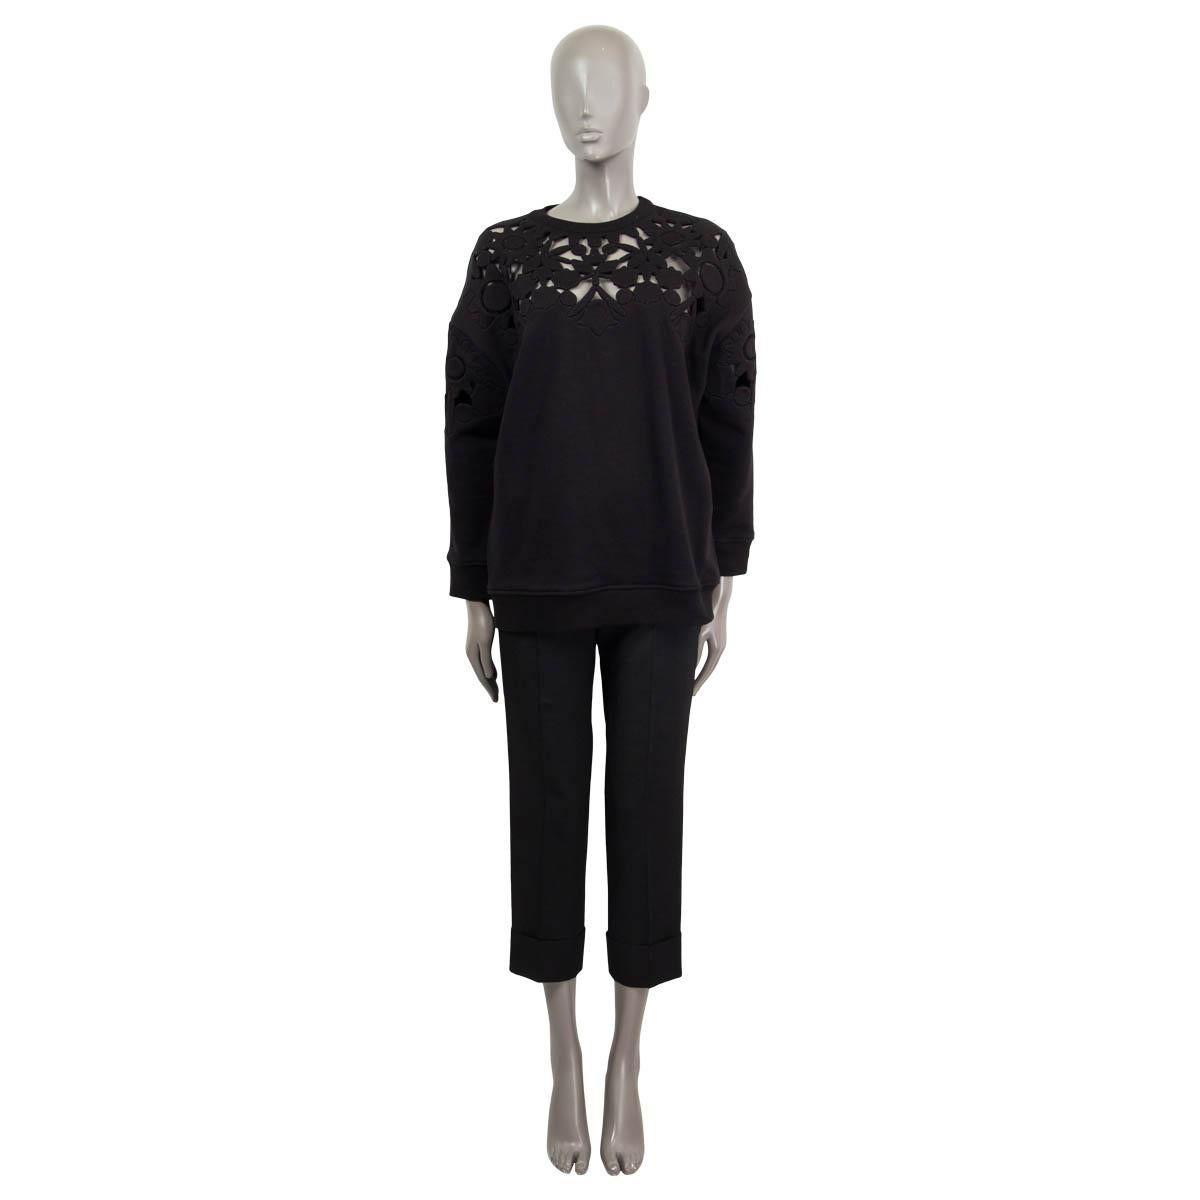 100% authentic Valentino oversized laser-cut detailed sweater in black cotton (97%) and elastane (3%). Has been worn and is in excellent condition. 

Measurements
Tag Size	XS
Size	XS
Shoulder Width	57cm (22.2in)
Bust From	118cm (46in)
Waist